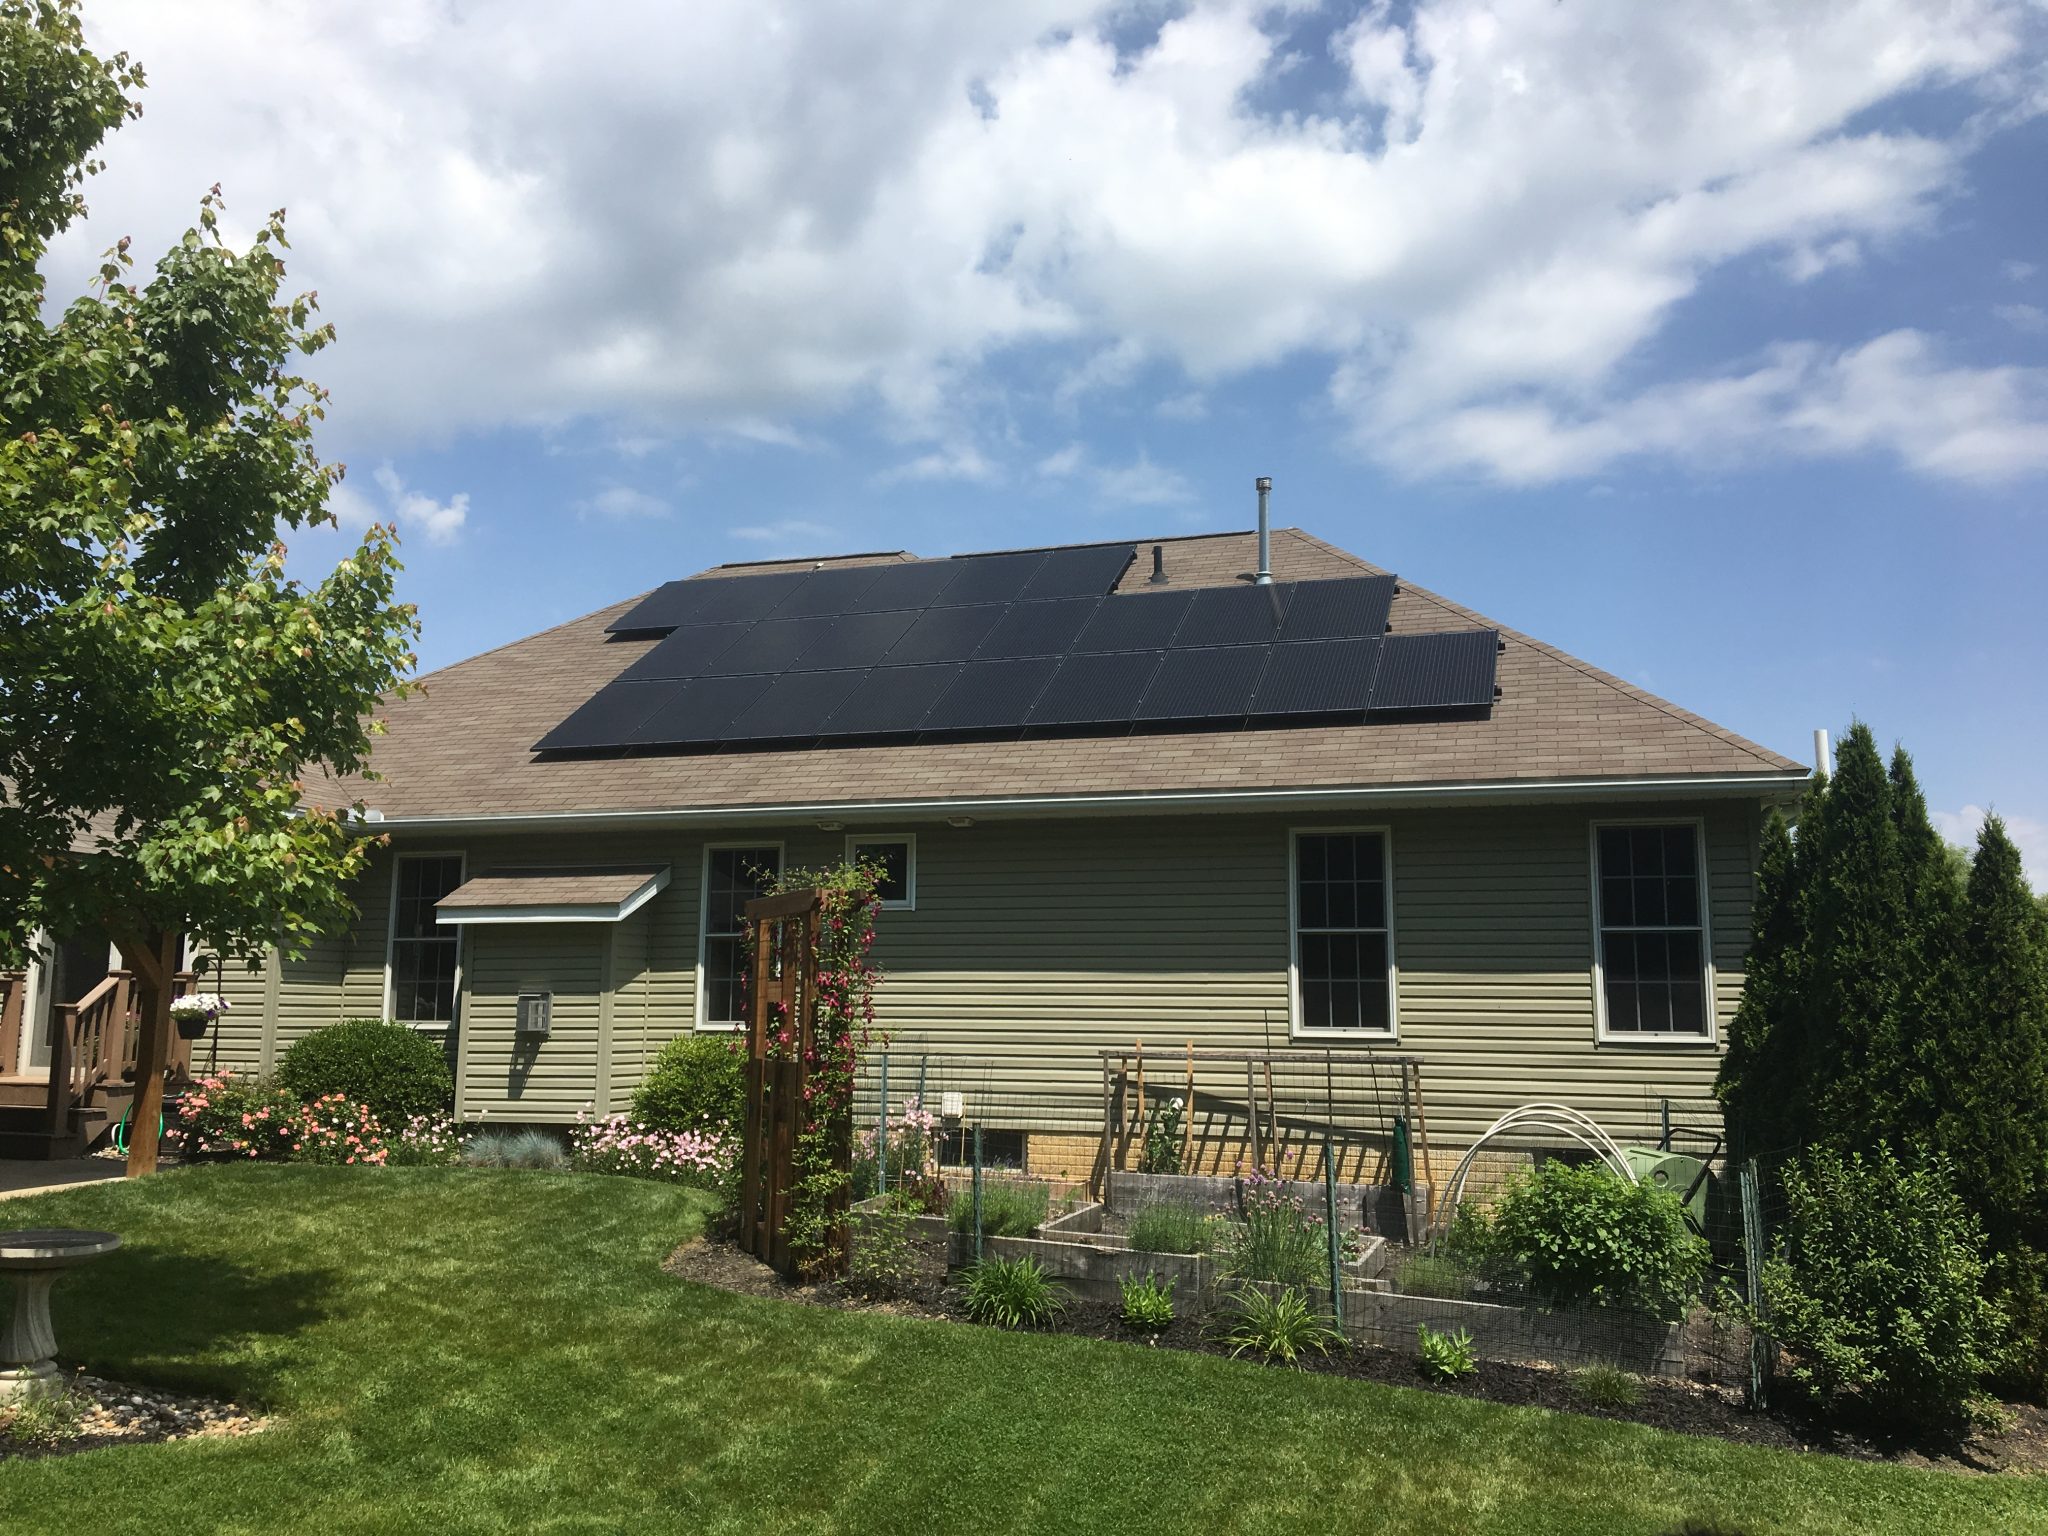 All You Need To Know About the Solar Tax Credit in 2020